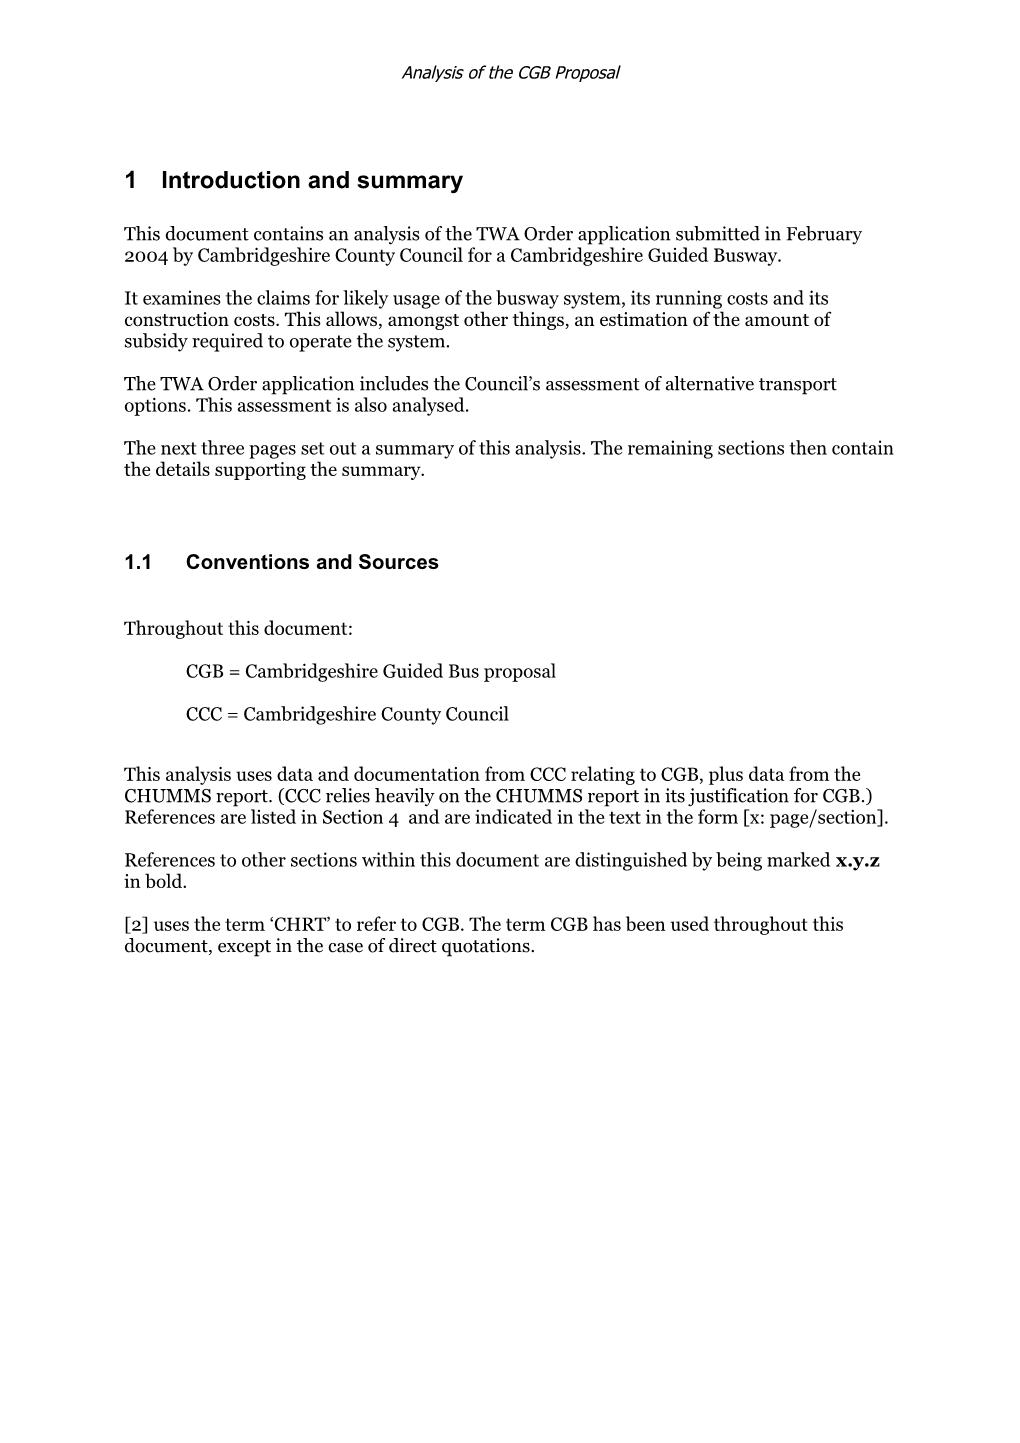 Analysis of the Cambridgeshire Guided Busway Order Proposal